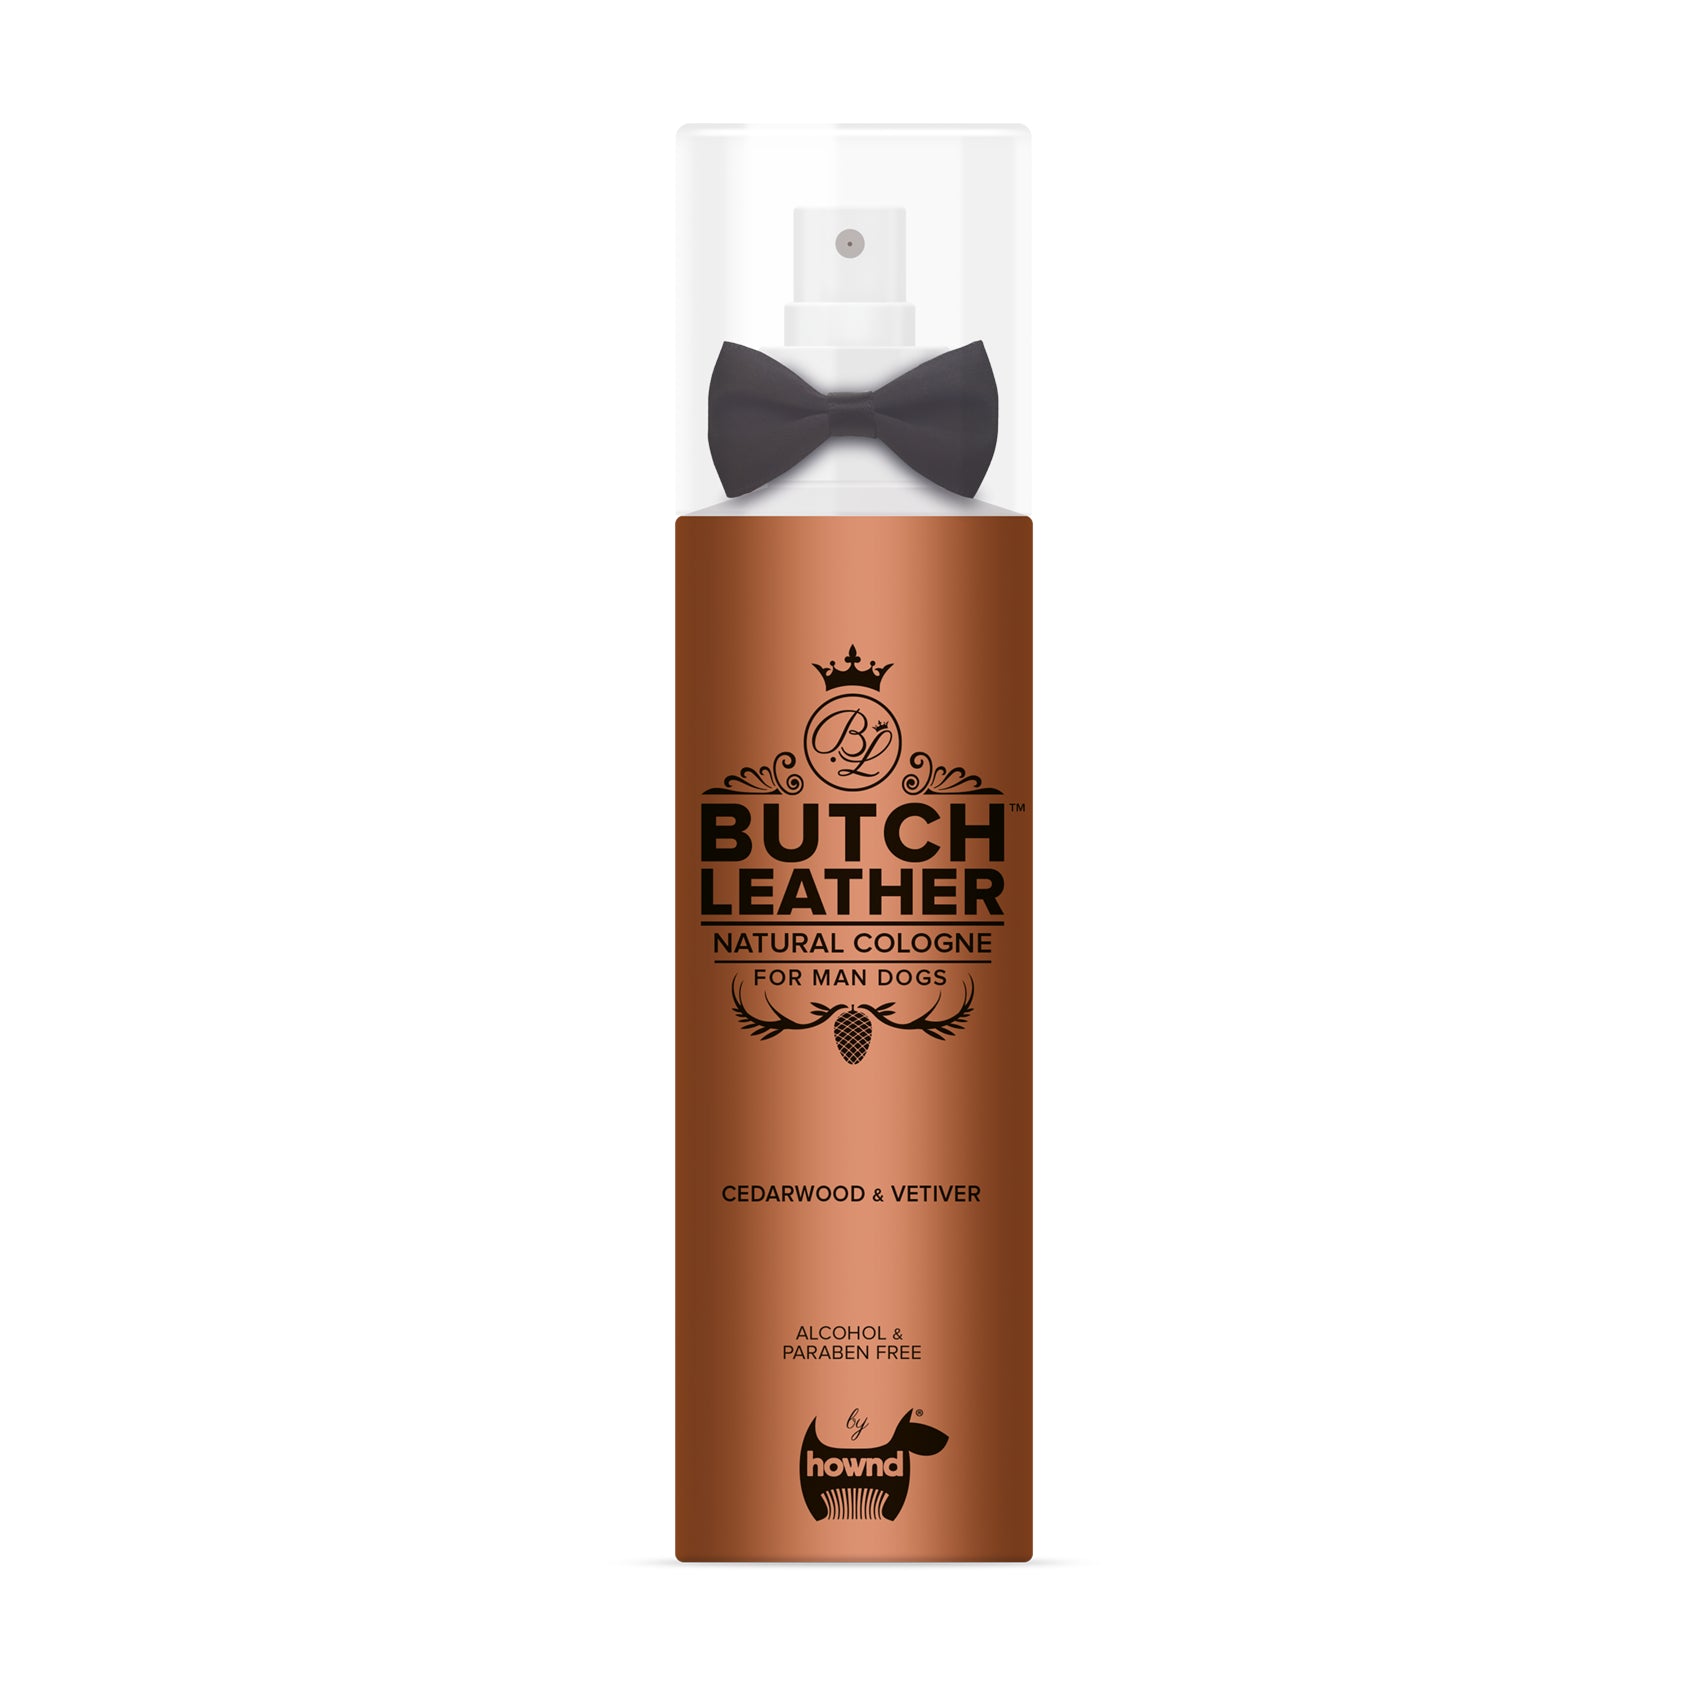 Butch Leather Natural Cologne for Male Dogs